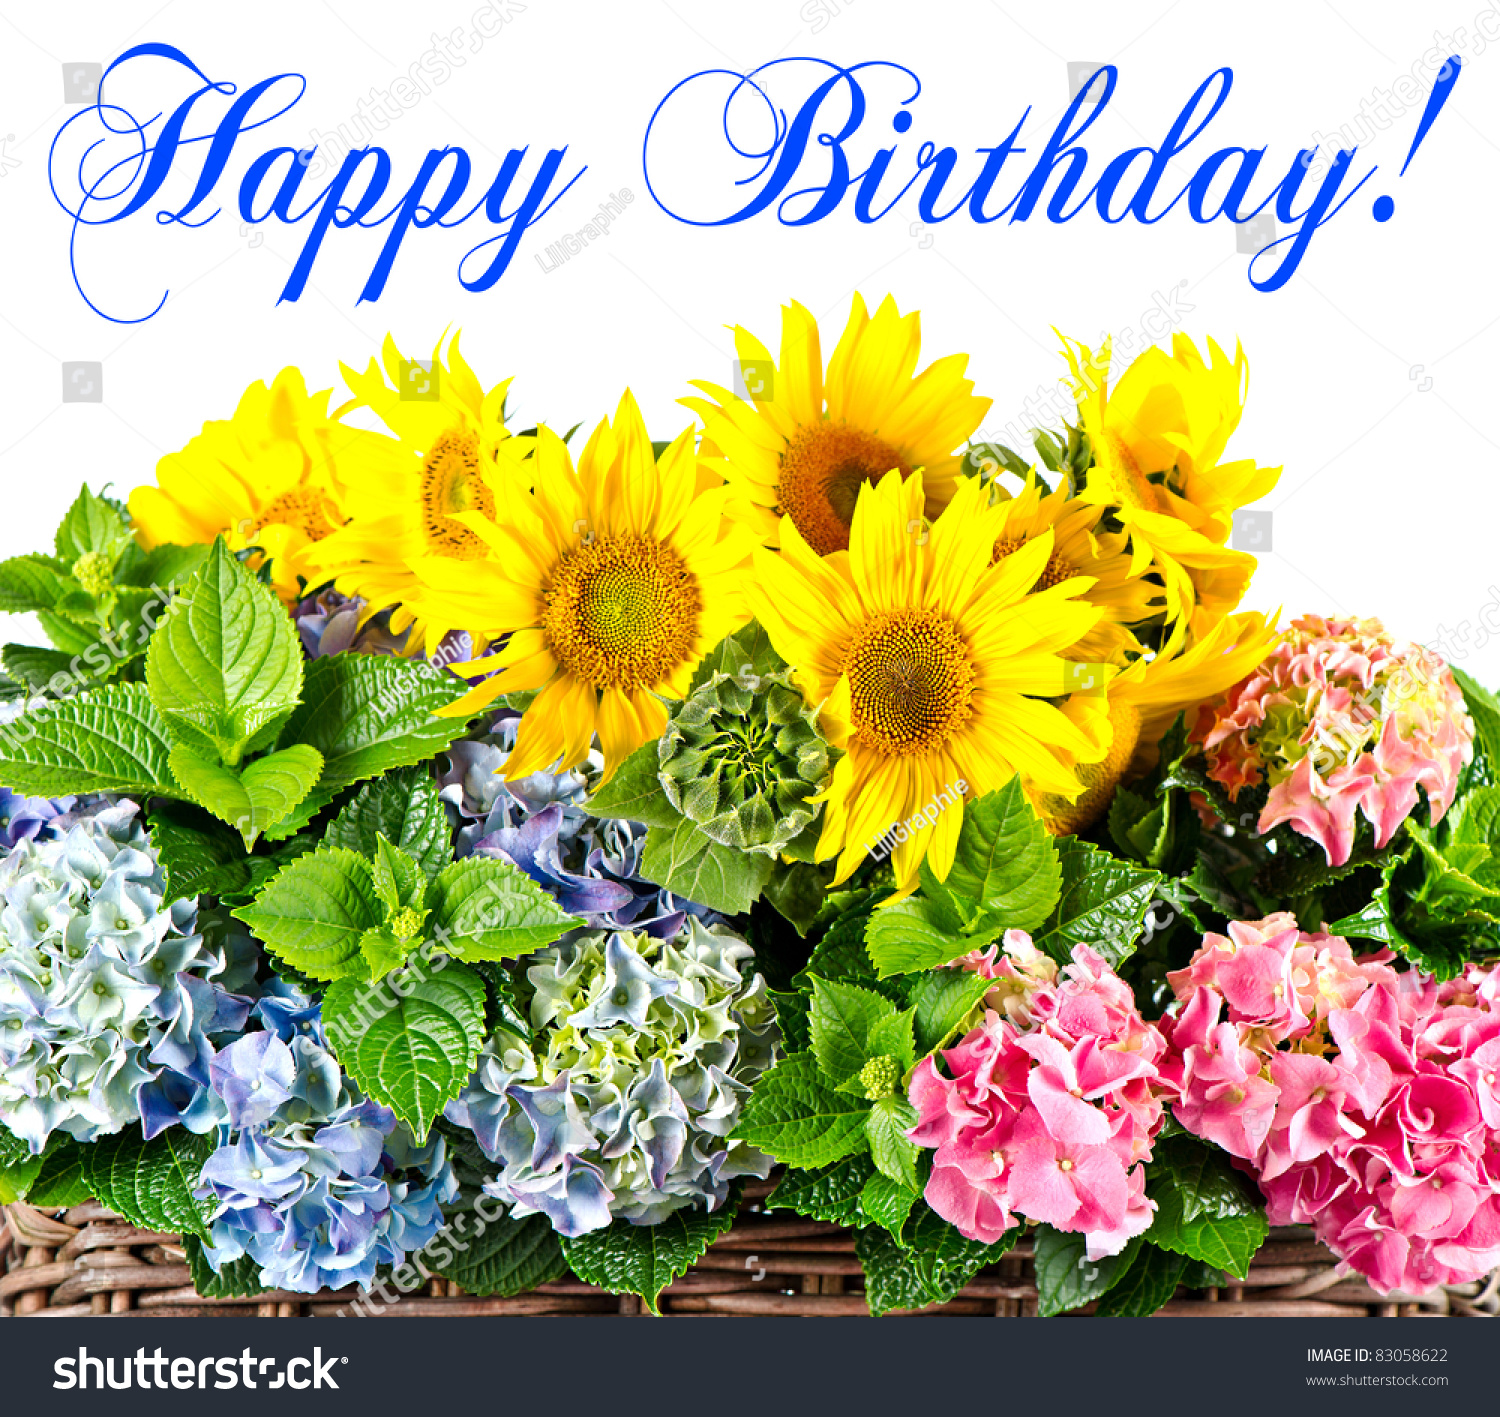 Happy Birthday Card Concept Colorful Sunflowers Stock Photo 83058622 ...